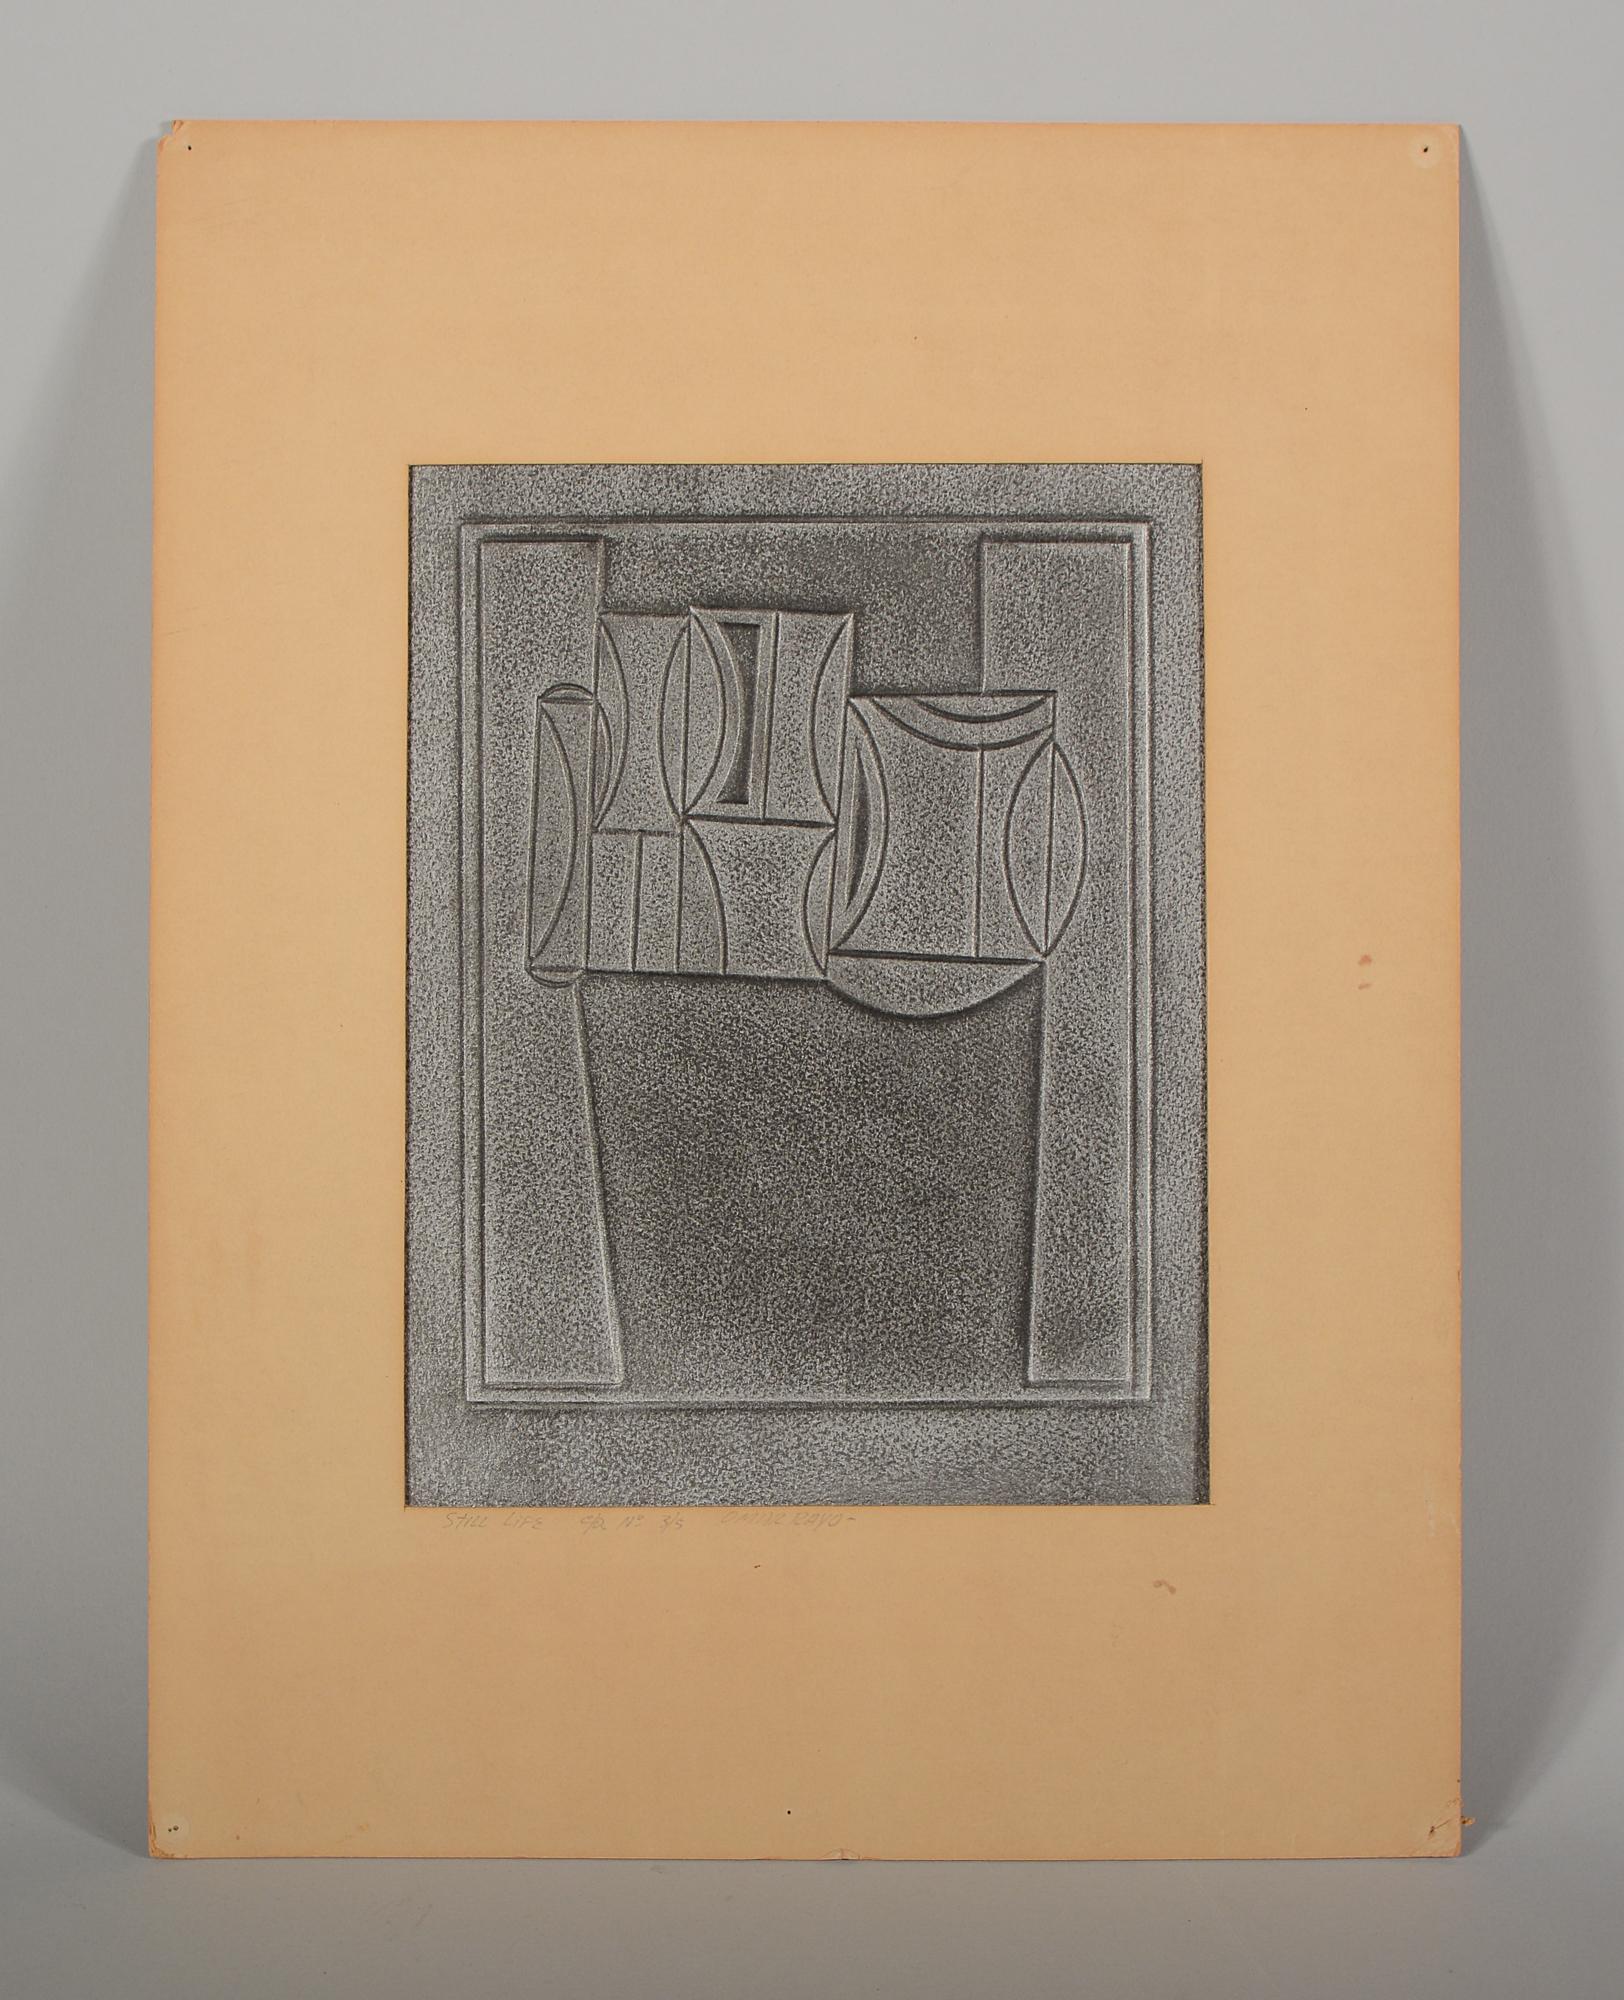 Intaglio print by Colombian artist Omar Rayo (1928-2010). This is signed in pencil on the matte 